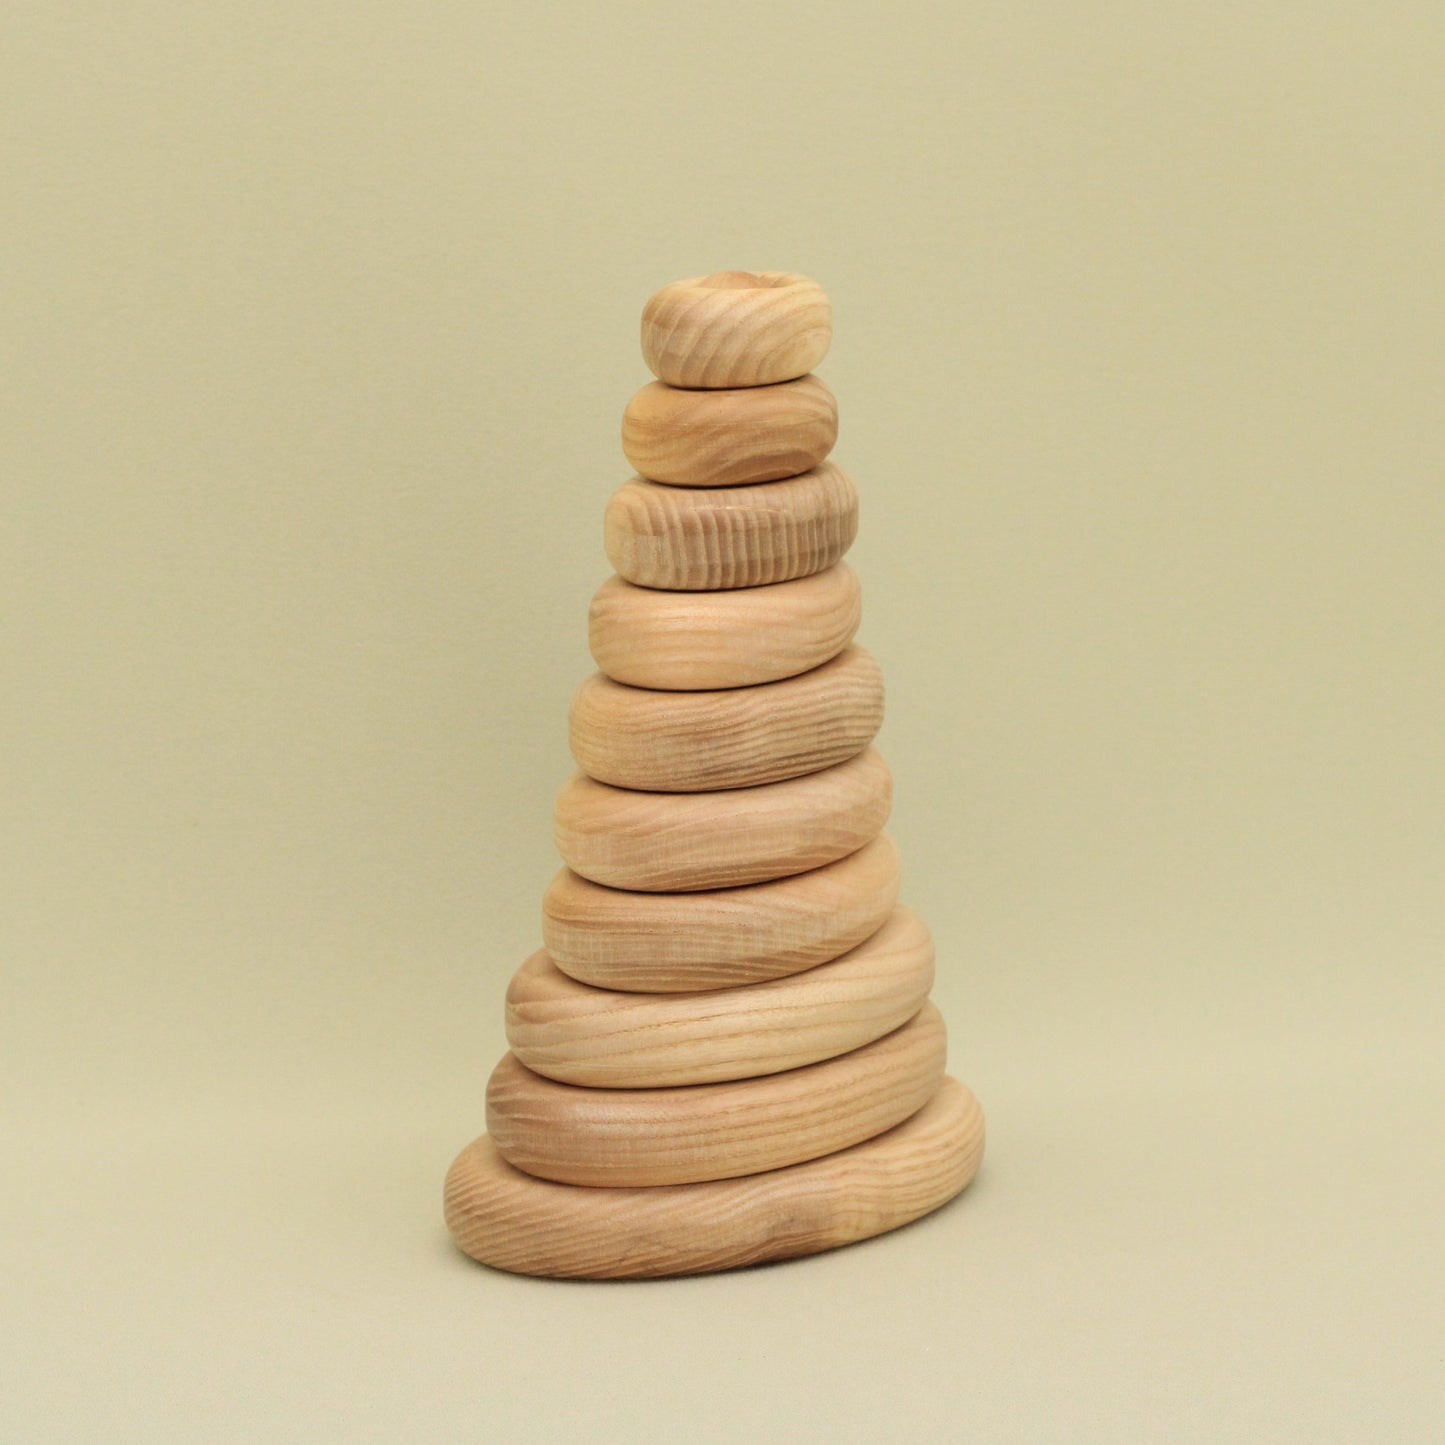 Lotes Toys Natural Oval Wooden Stacking Pyramid - 10 pieces PY06